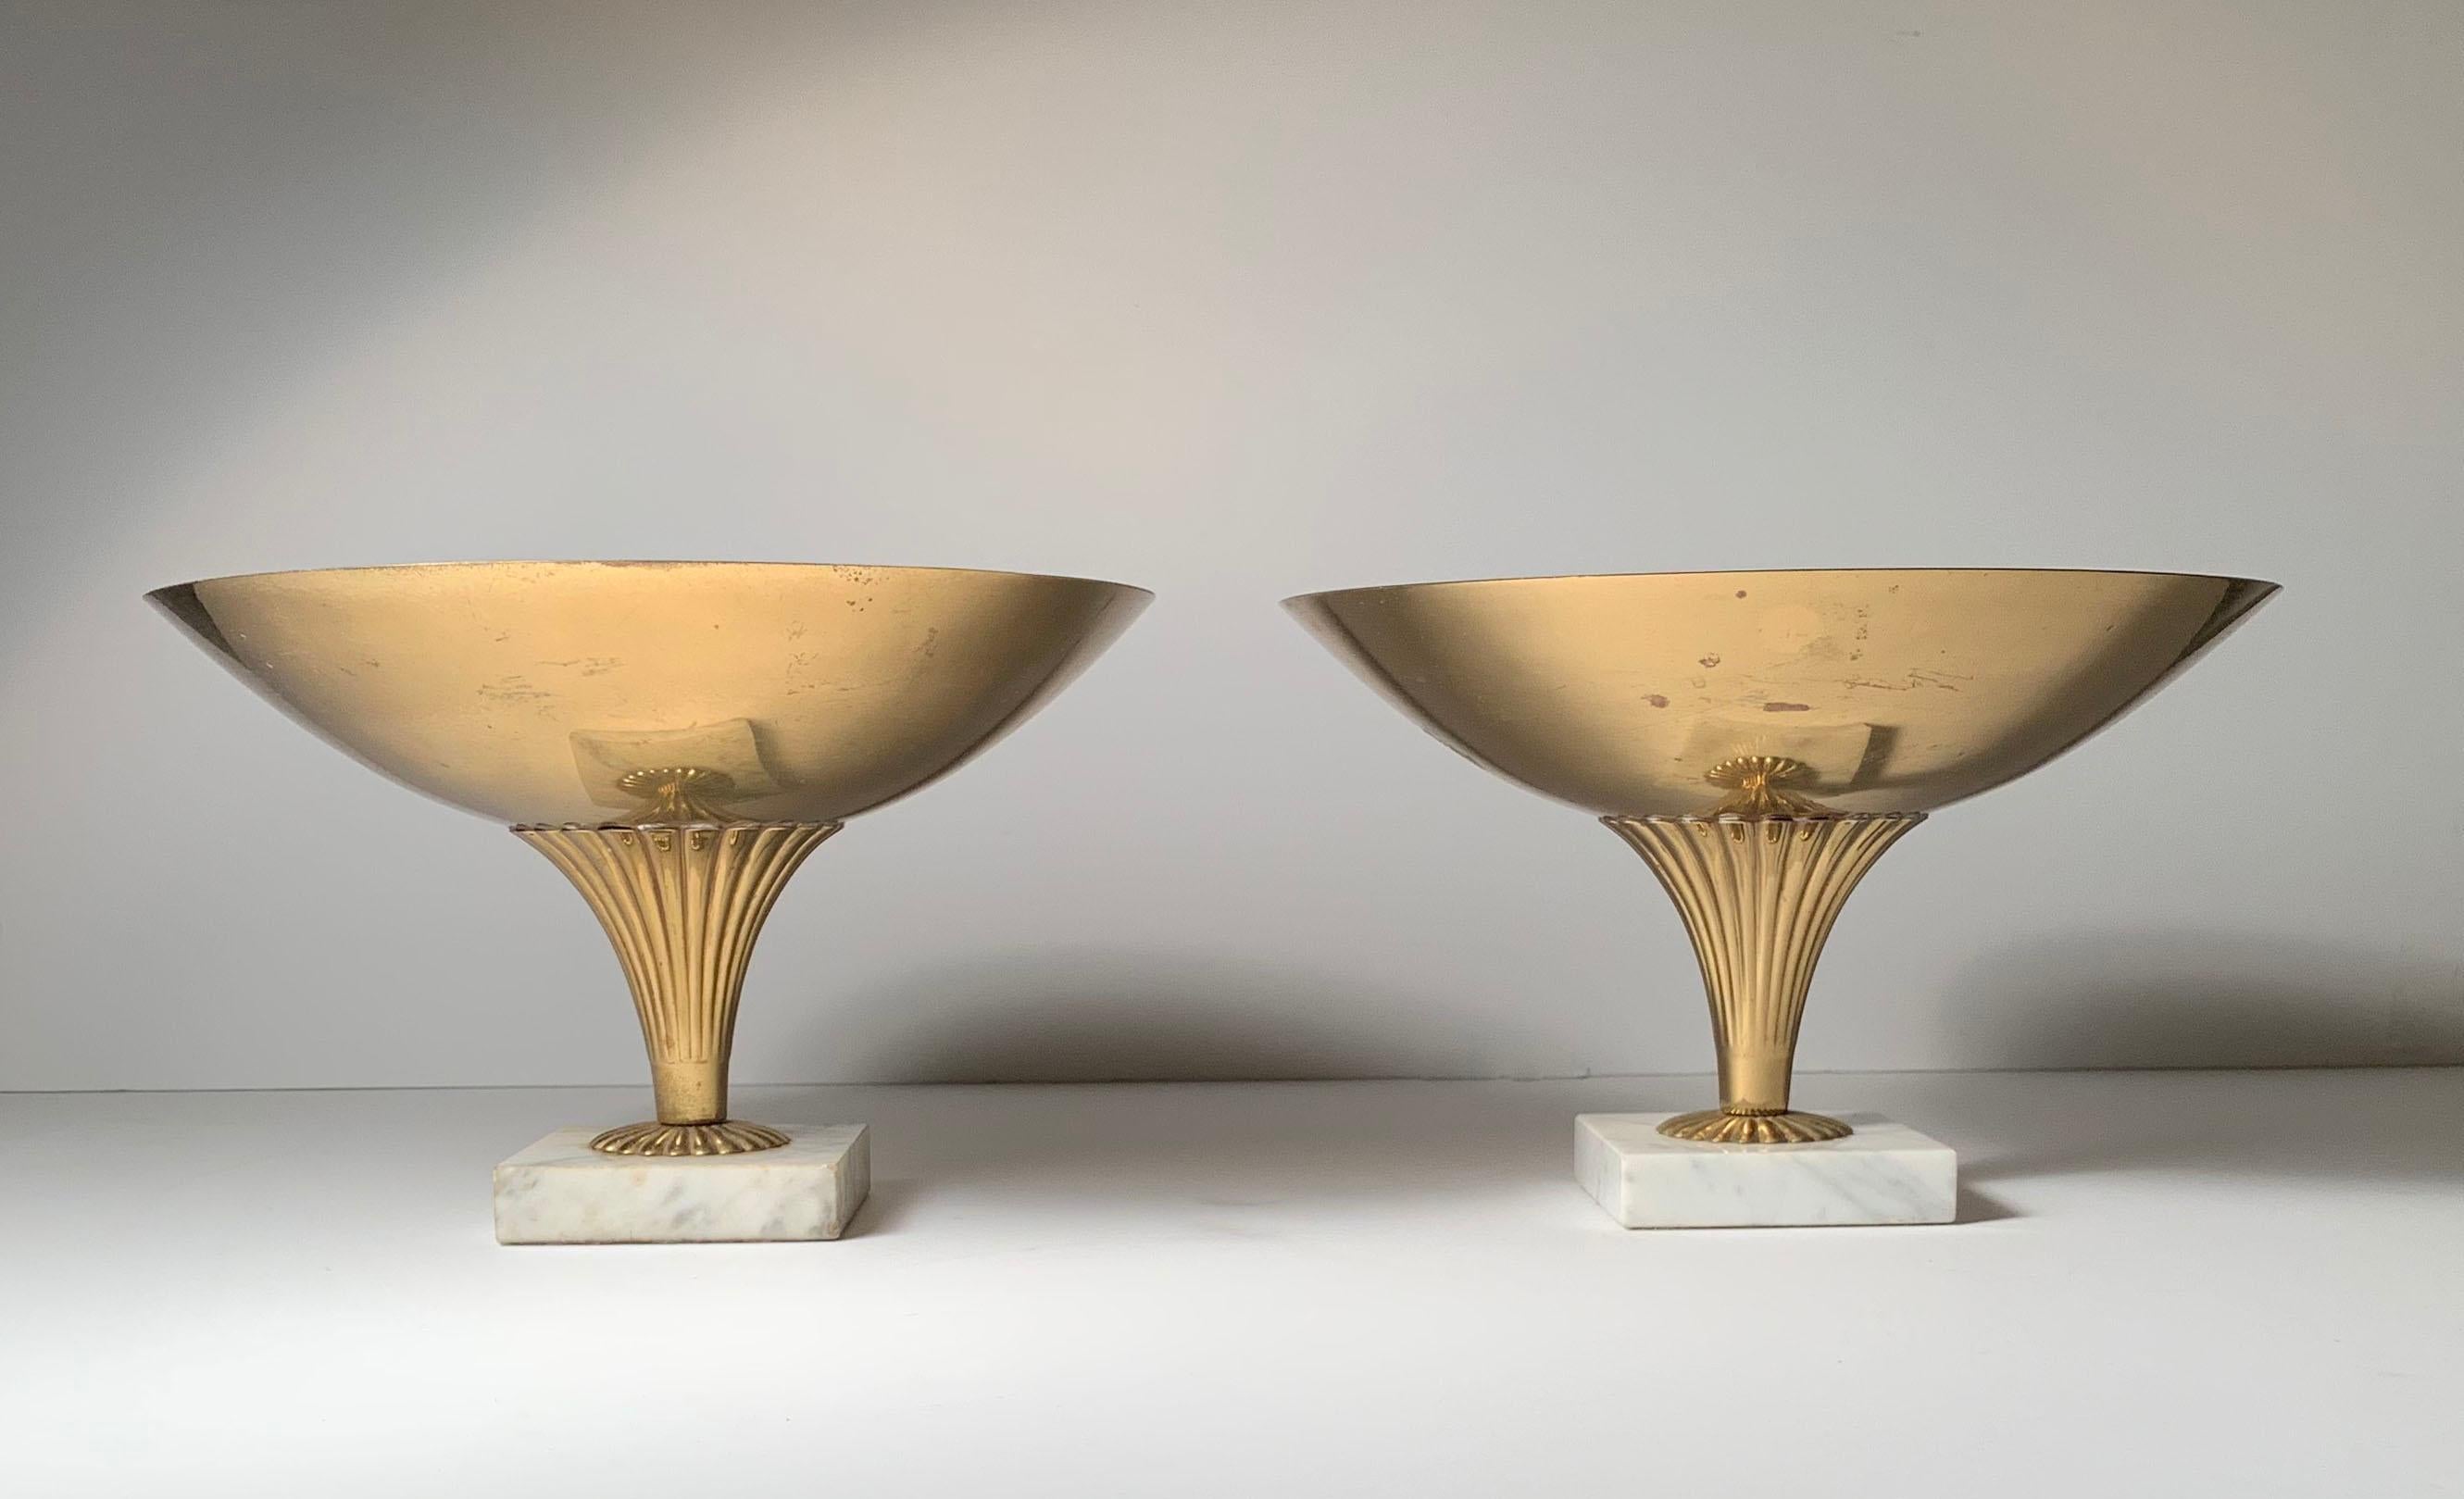 Pair of vintage Italian brass and marble compotes possibly by Tommi Parzinger. No signature.
Show nice age and high quality craftsmanship.
Vintage wear on brass.
Sticker 